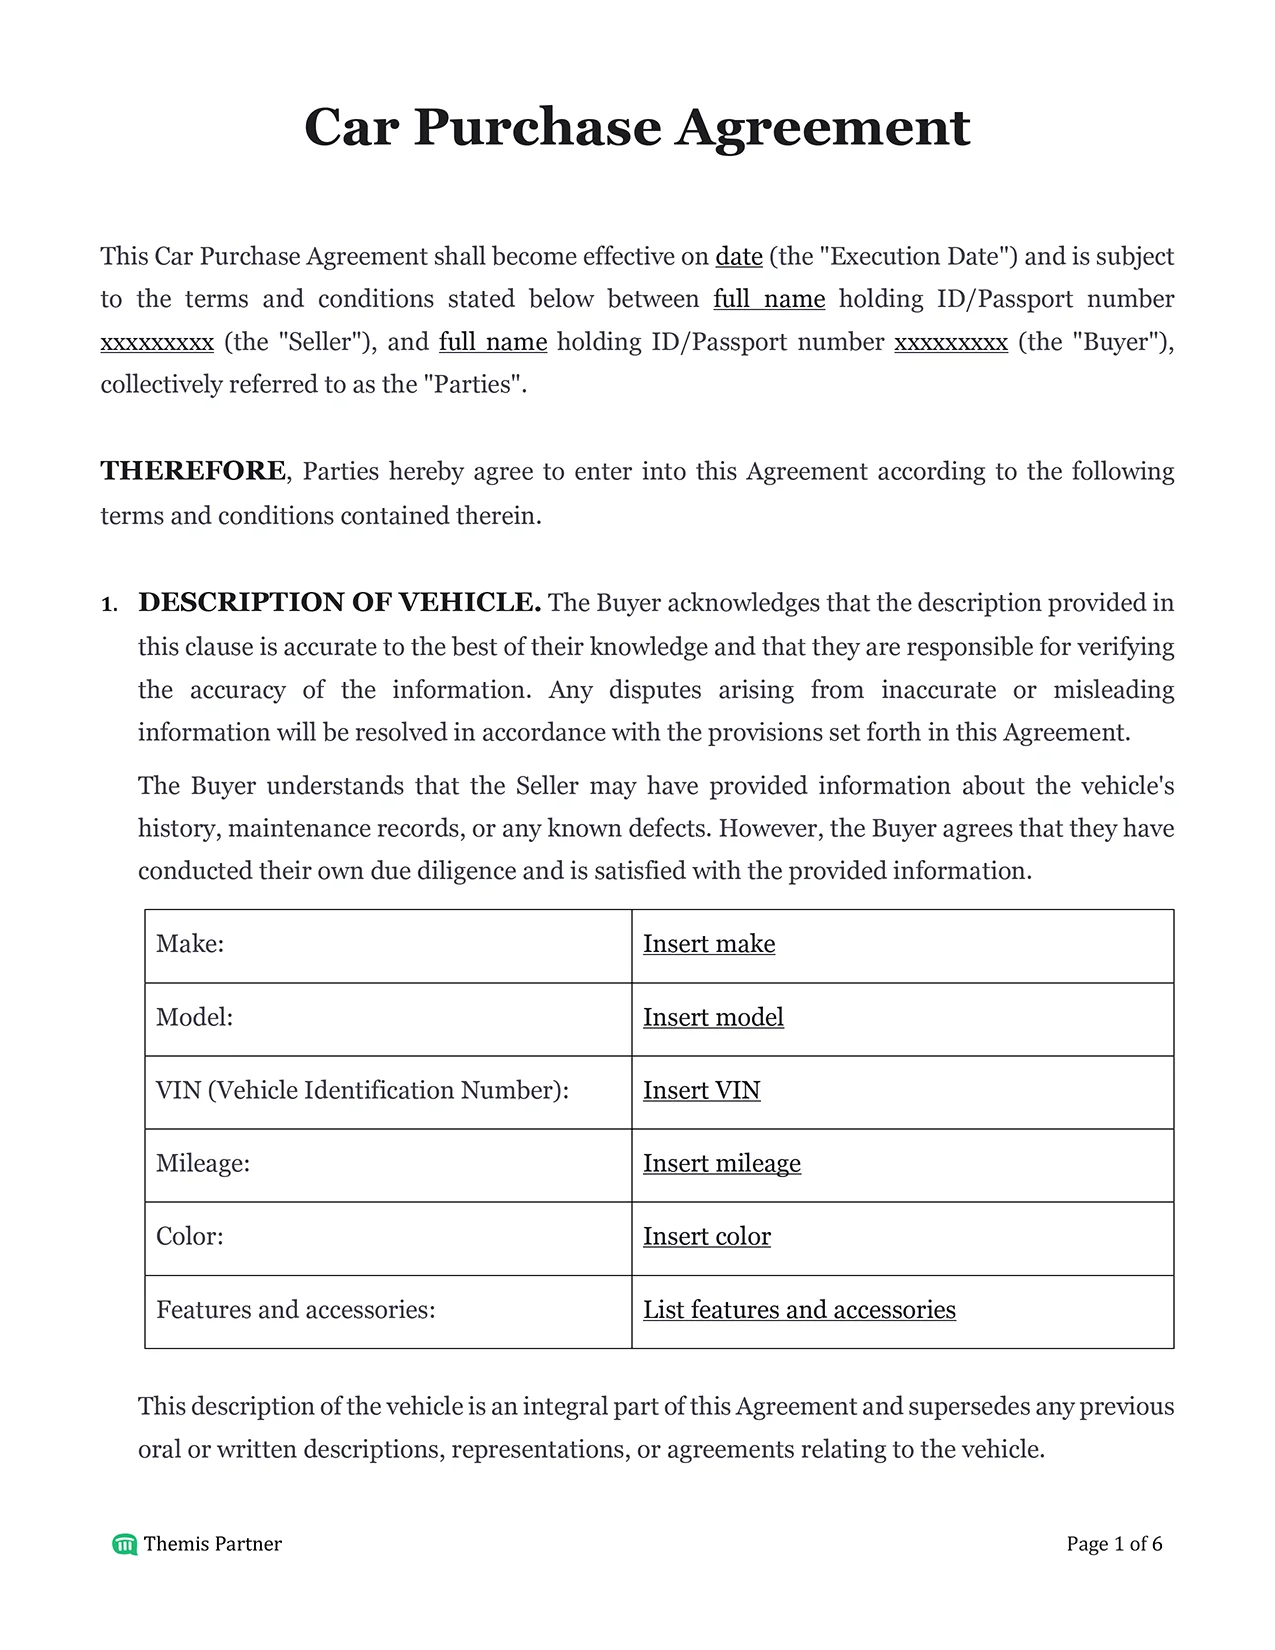 Car purchase agreement India 1